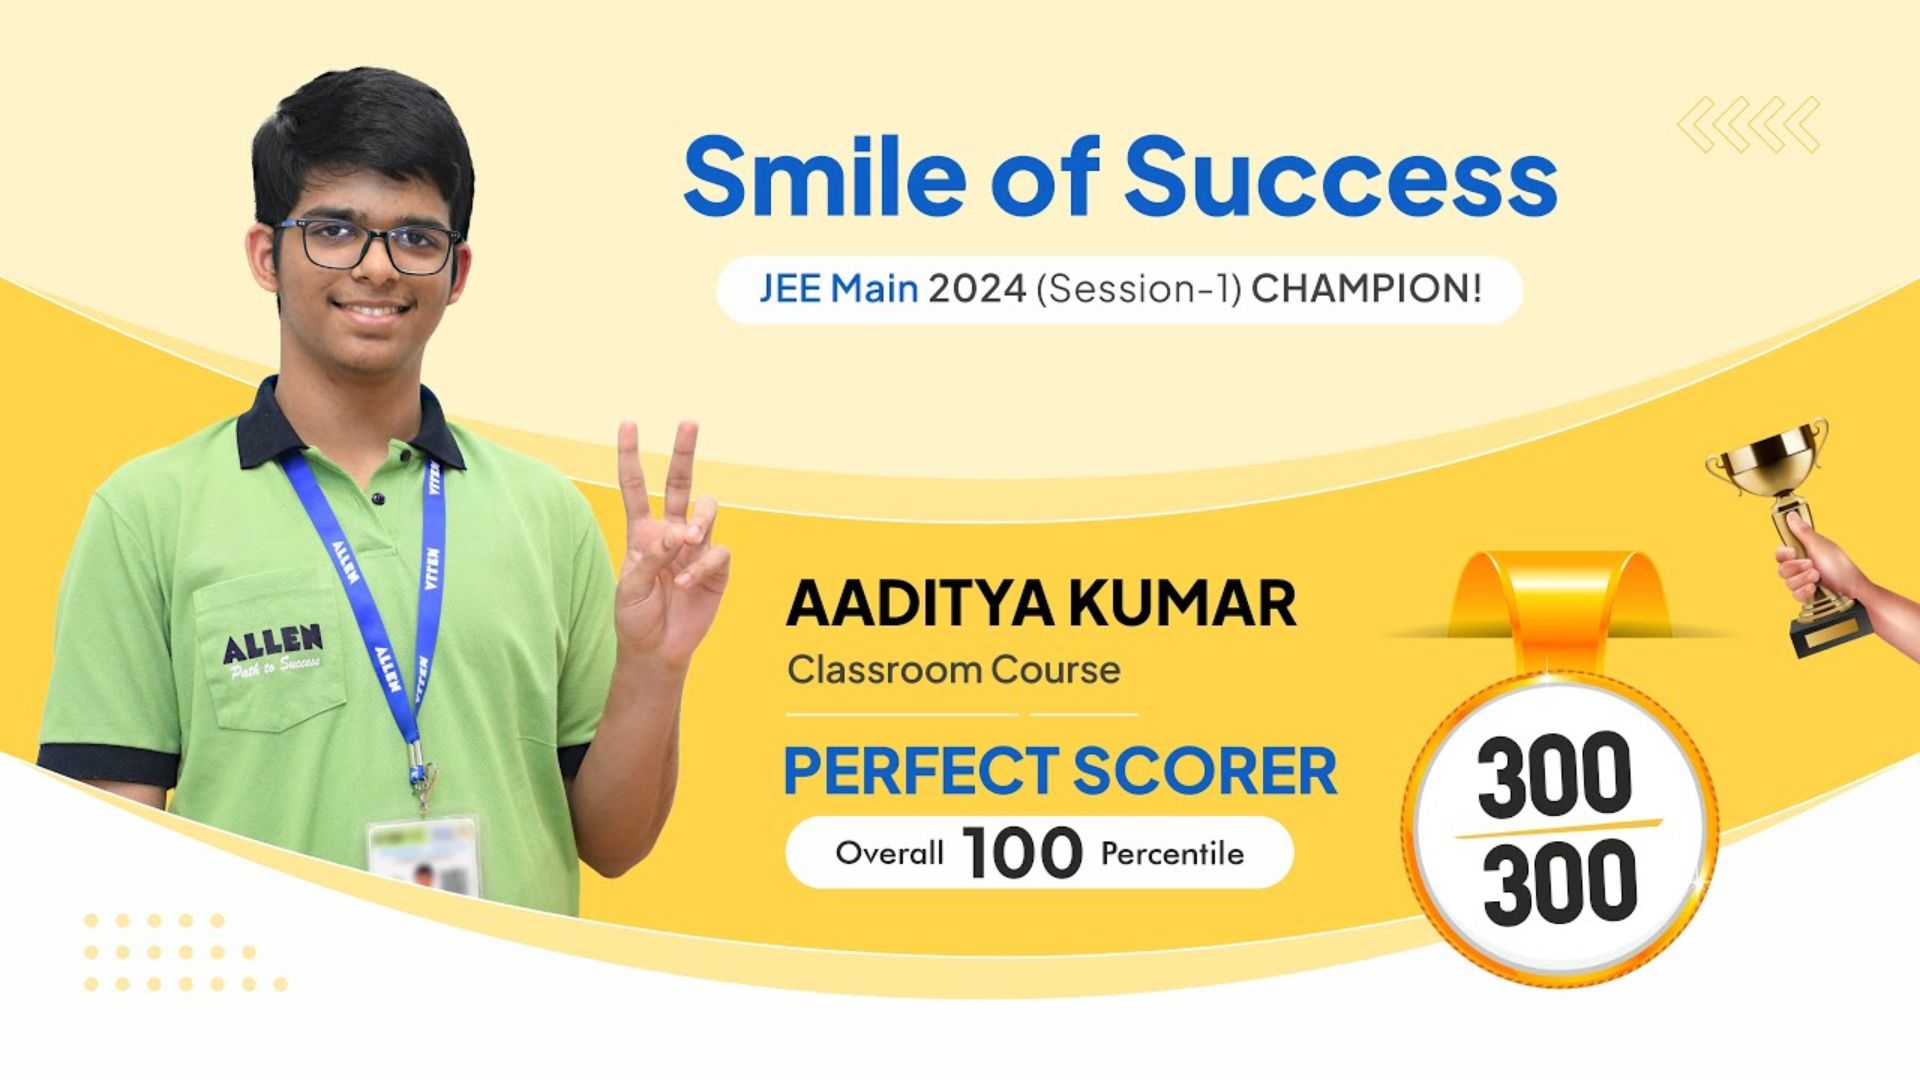 “Recreational Activity is a Must”: Here’s The Success Secret Of JEE Main Topper Aditya Kumar